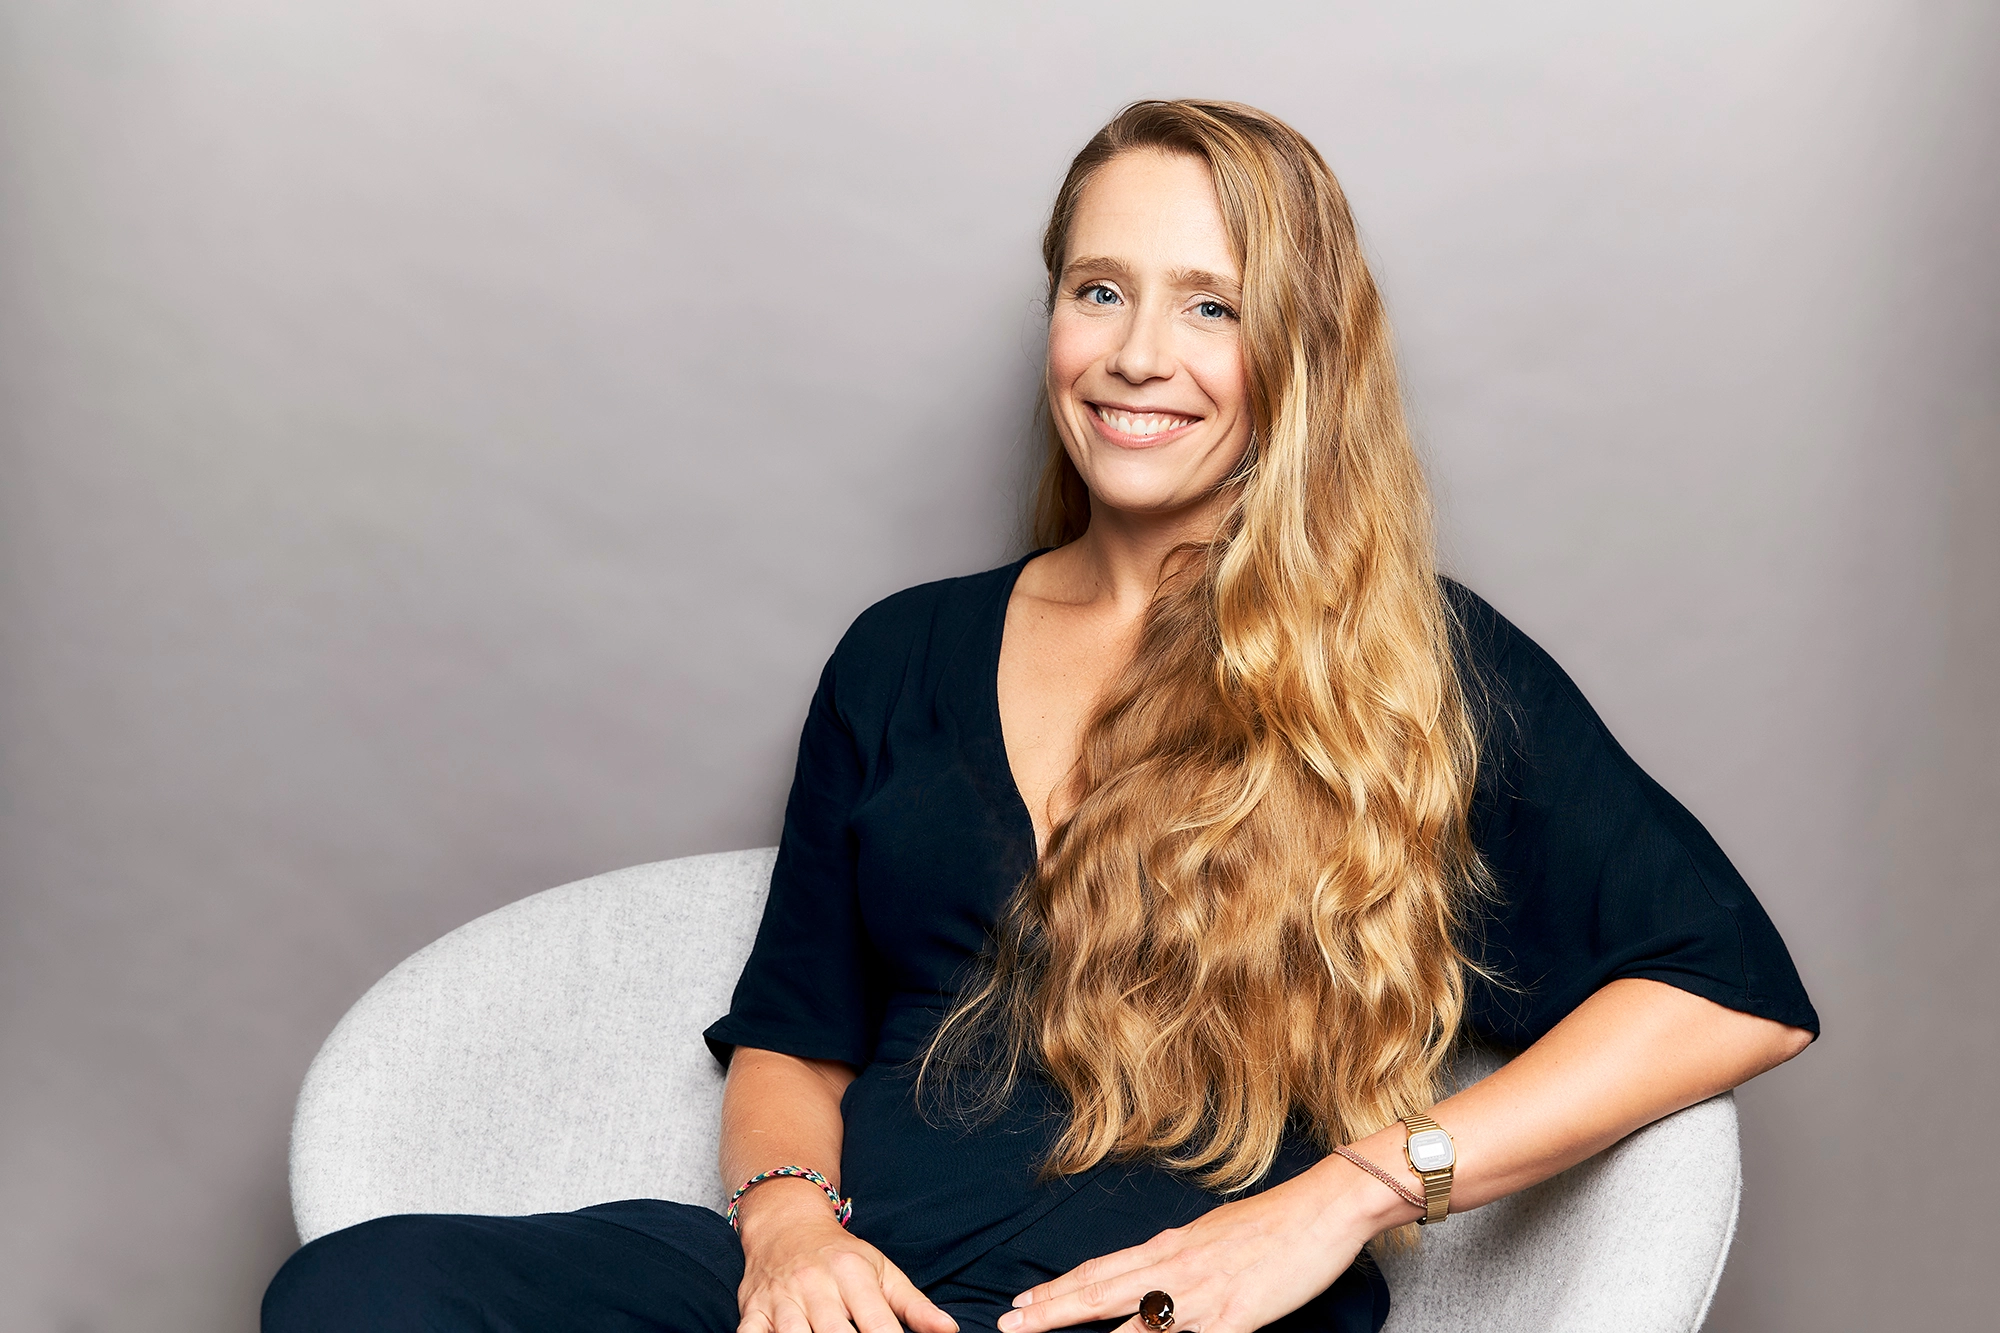 WARNER CHAPPELL MUSIC NAMES CLAIRE MCAULEY AS EVP, GLOBAL RIGHTS MANAGEMENT: Pressparty